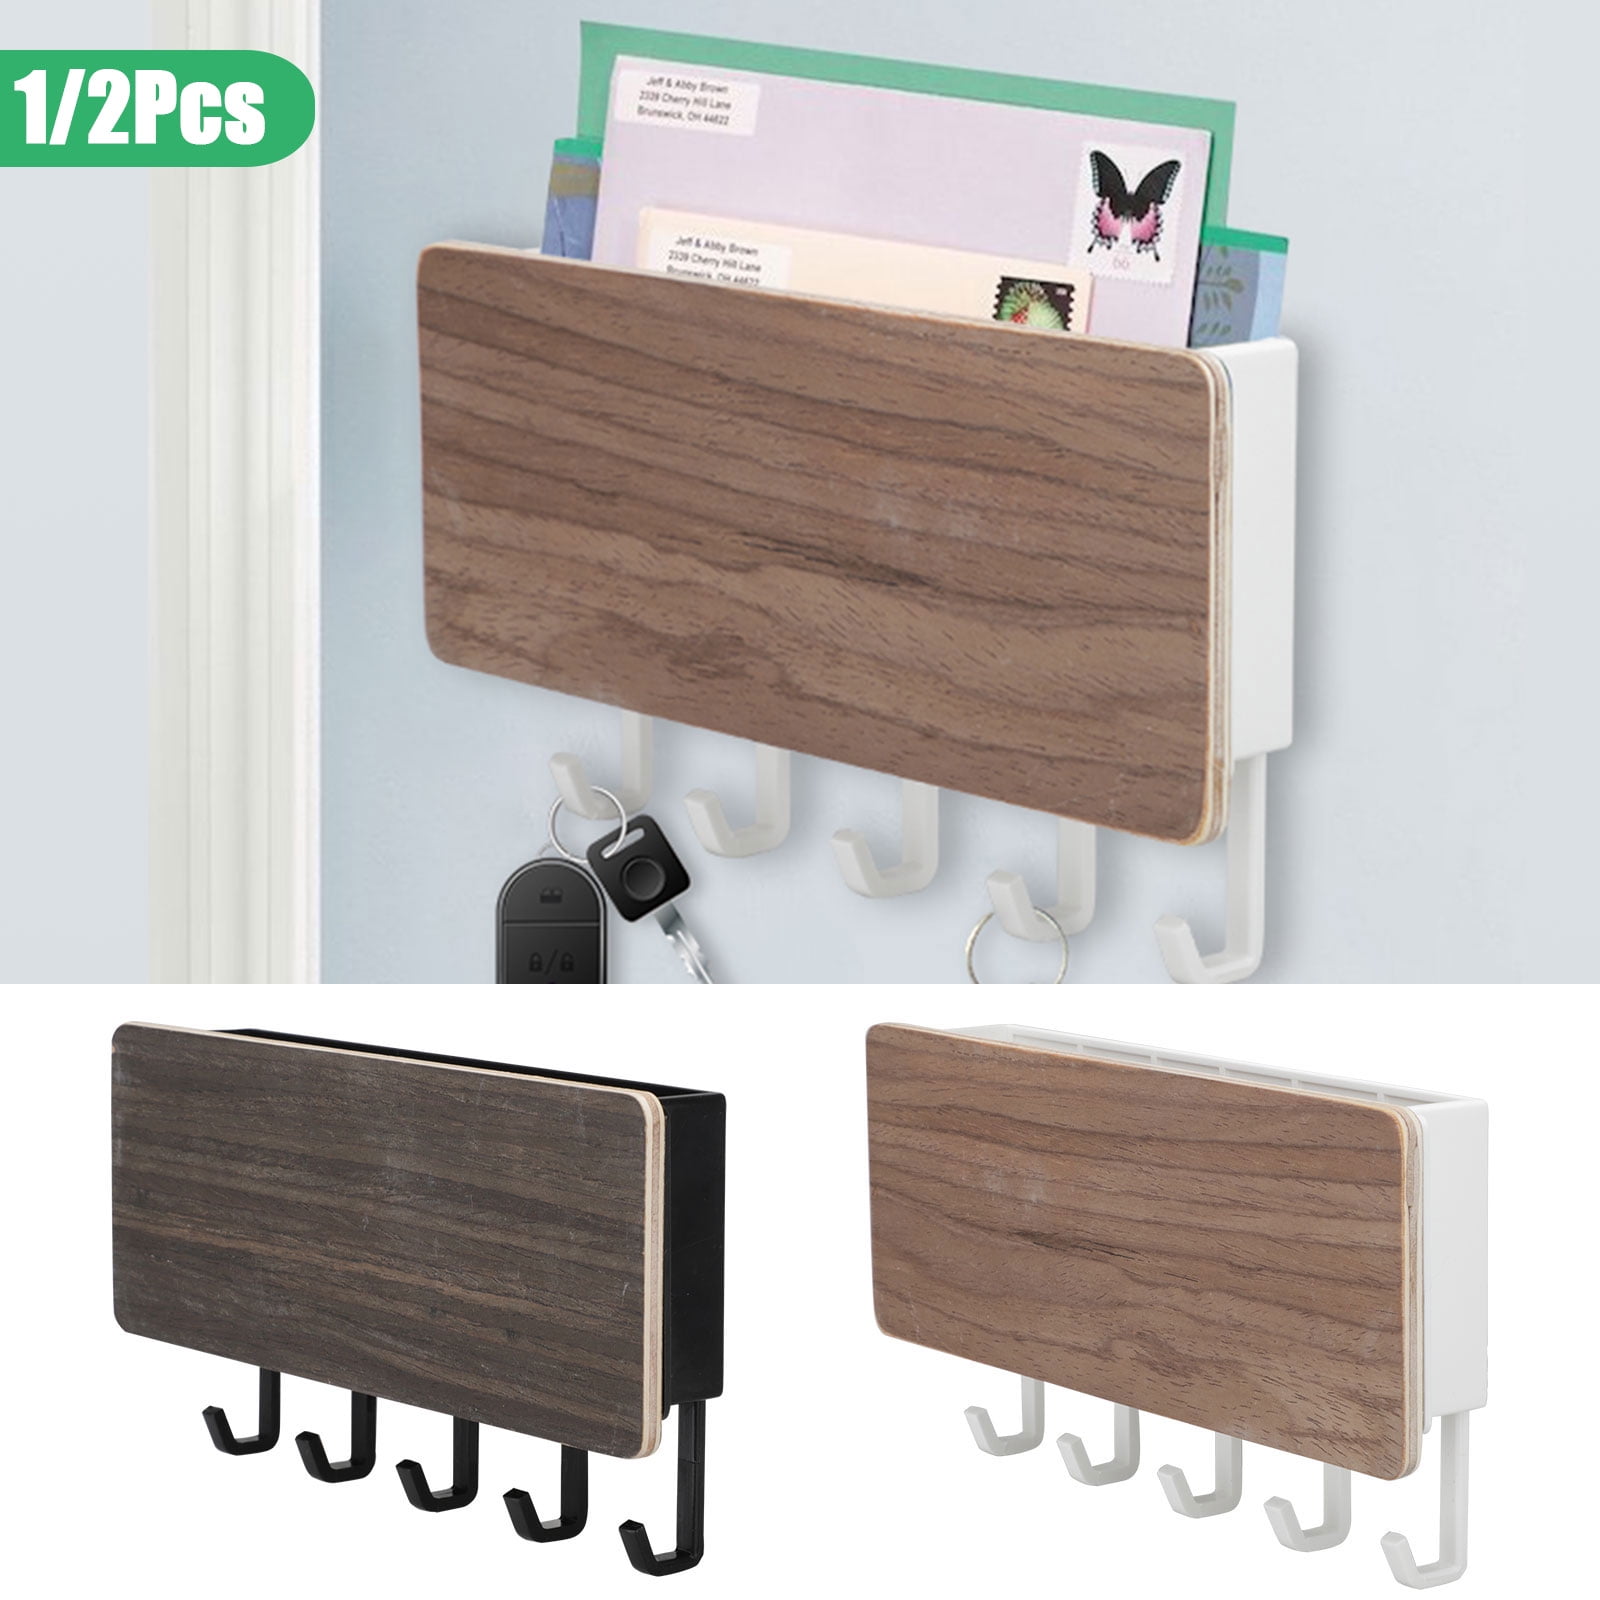 Beige JUNSHUO 1 Pcs Mail Holder and Key Rack Wall Mounted Letter Organizer with 4 Hooks and 2 Pack 3M Self Adhesive Tape for Hanging next to the Door